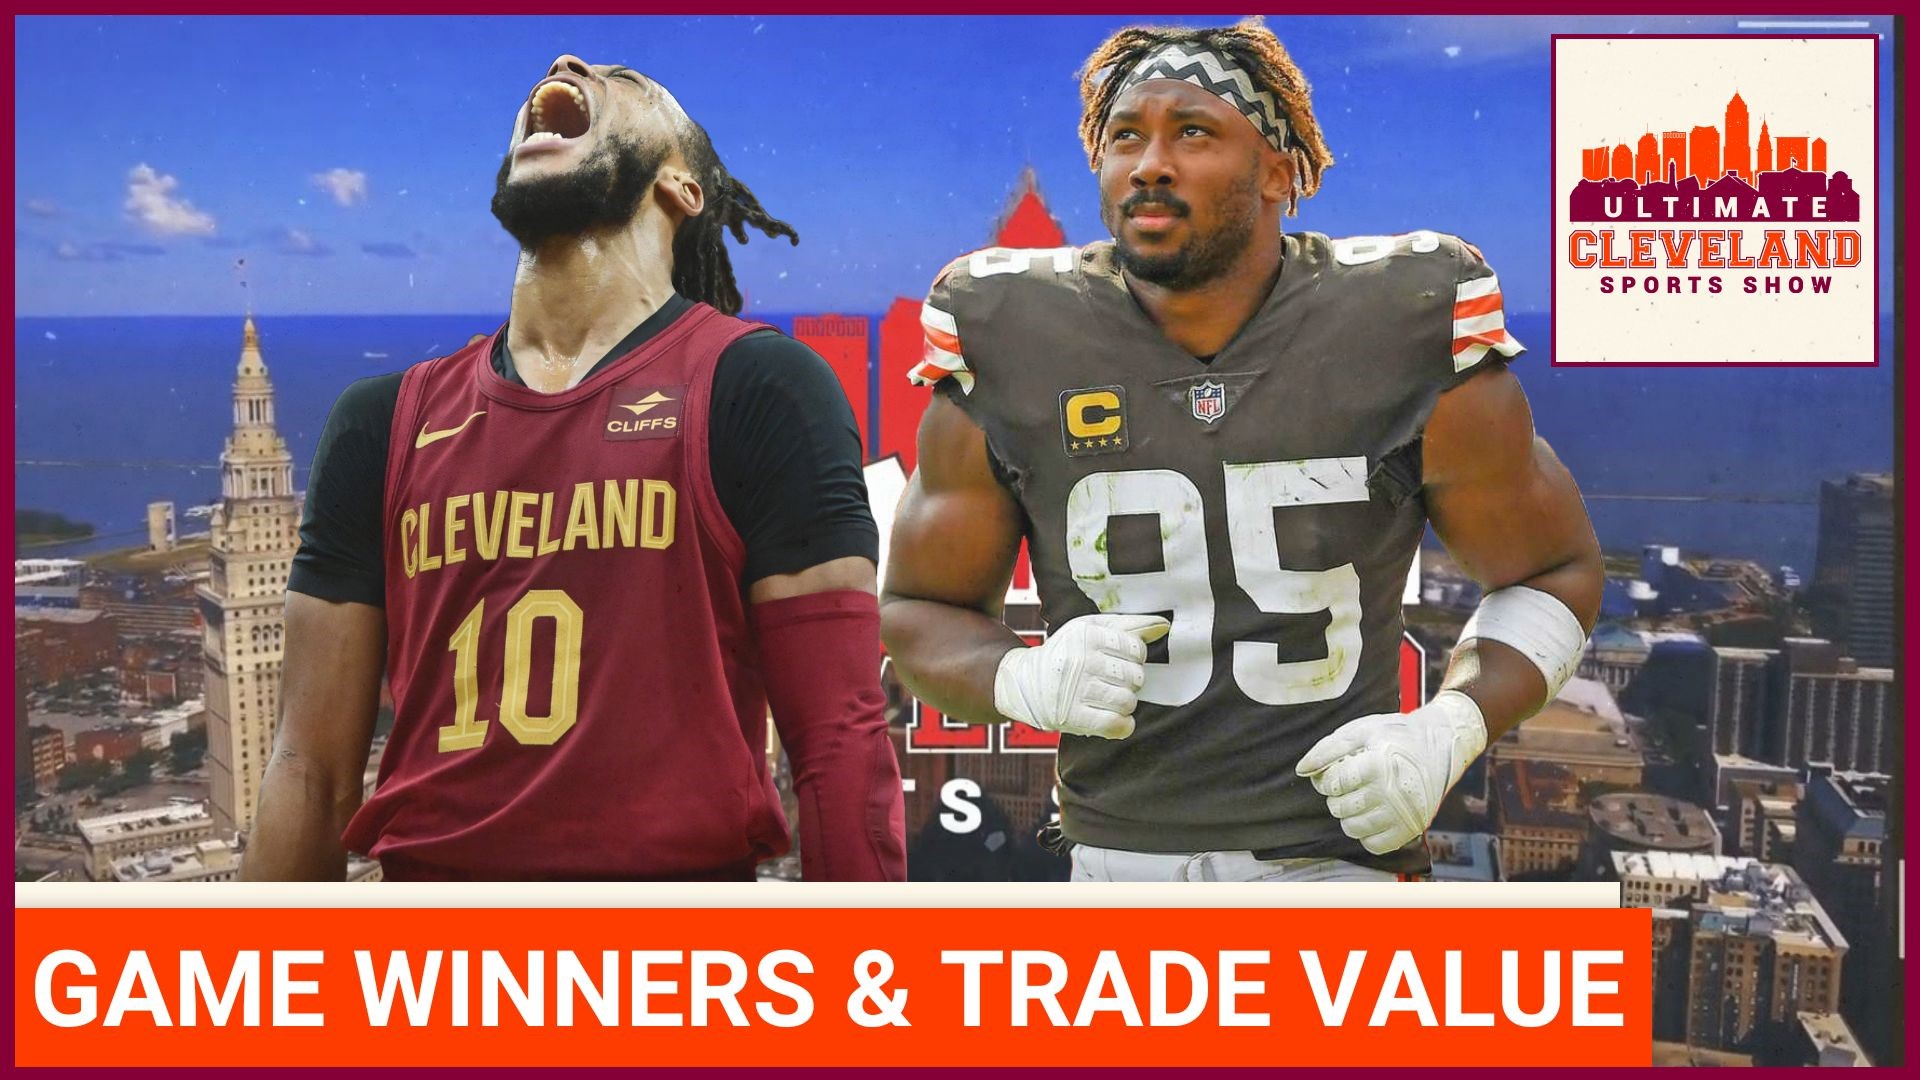 What would the return be for some of Cleveland's top athletes?